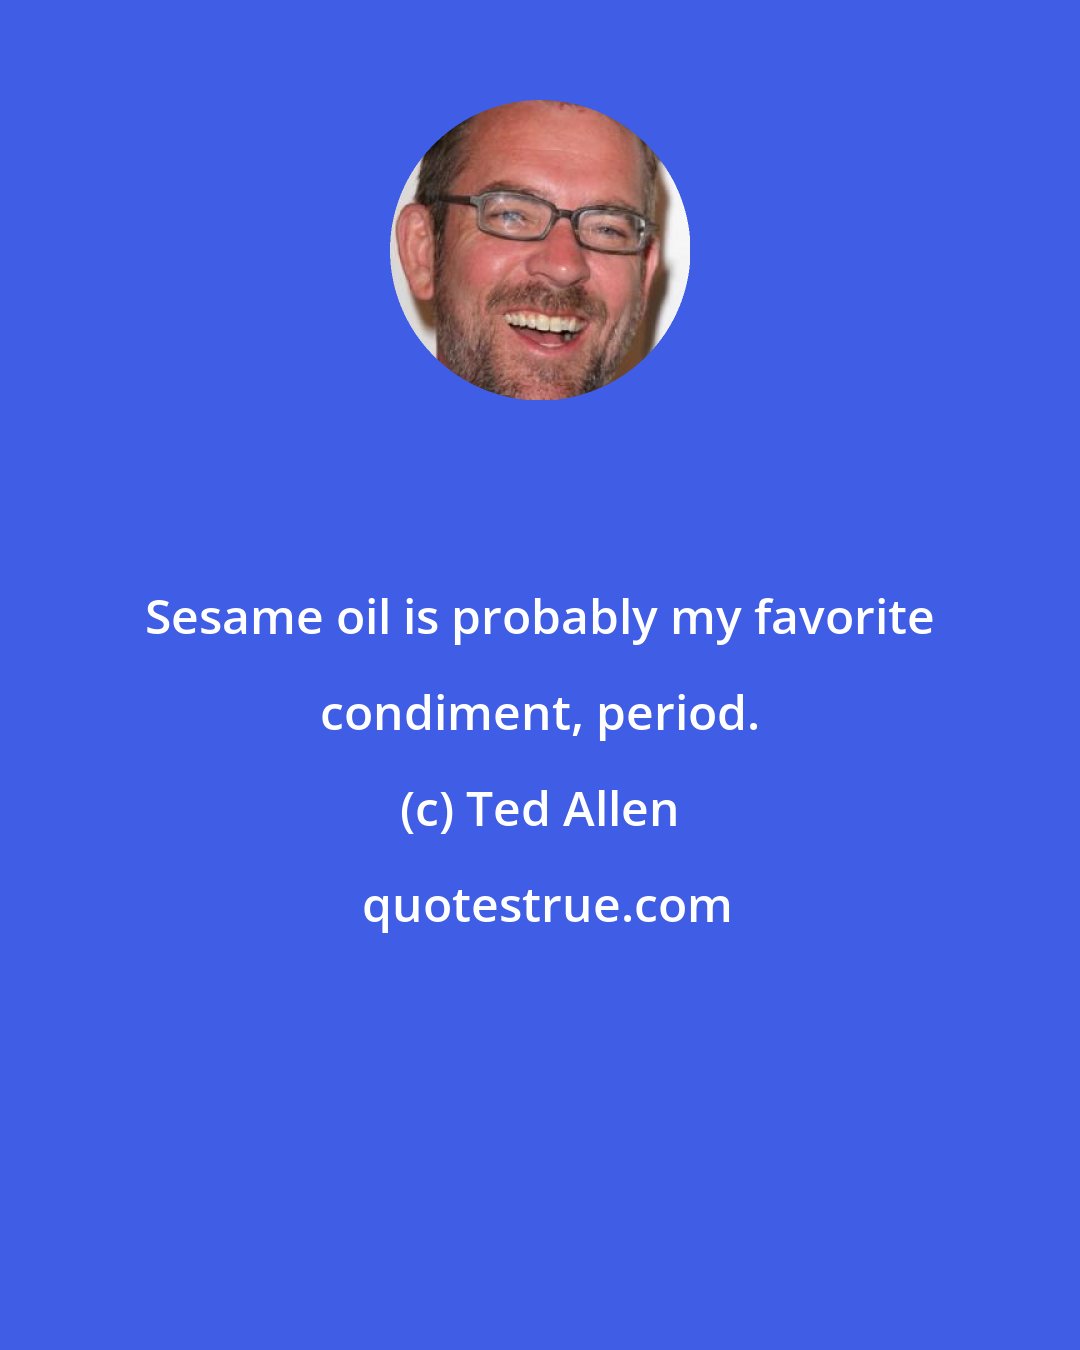 Ted Allen: Sesame oil is probably my favorite condiment, period.